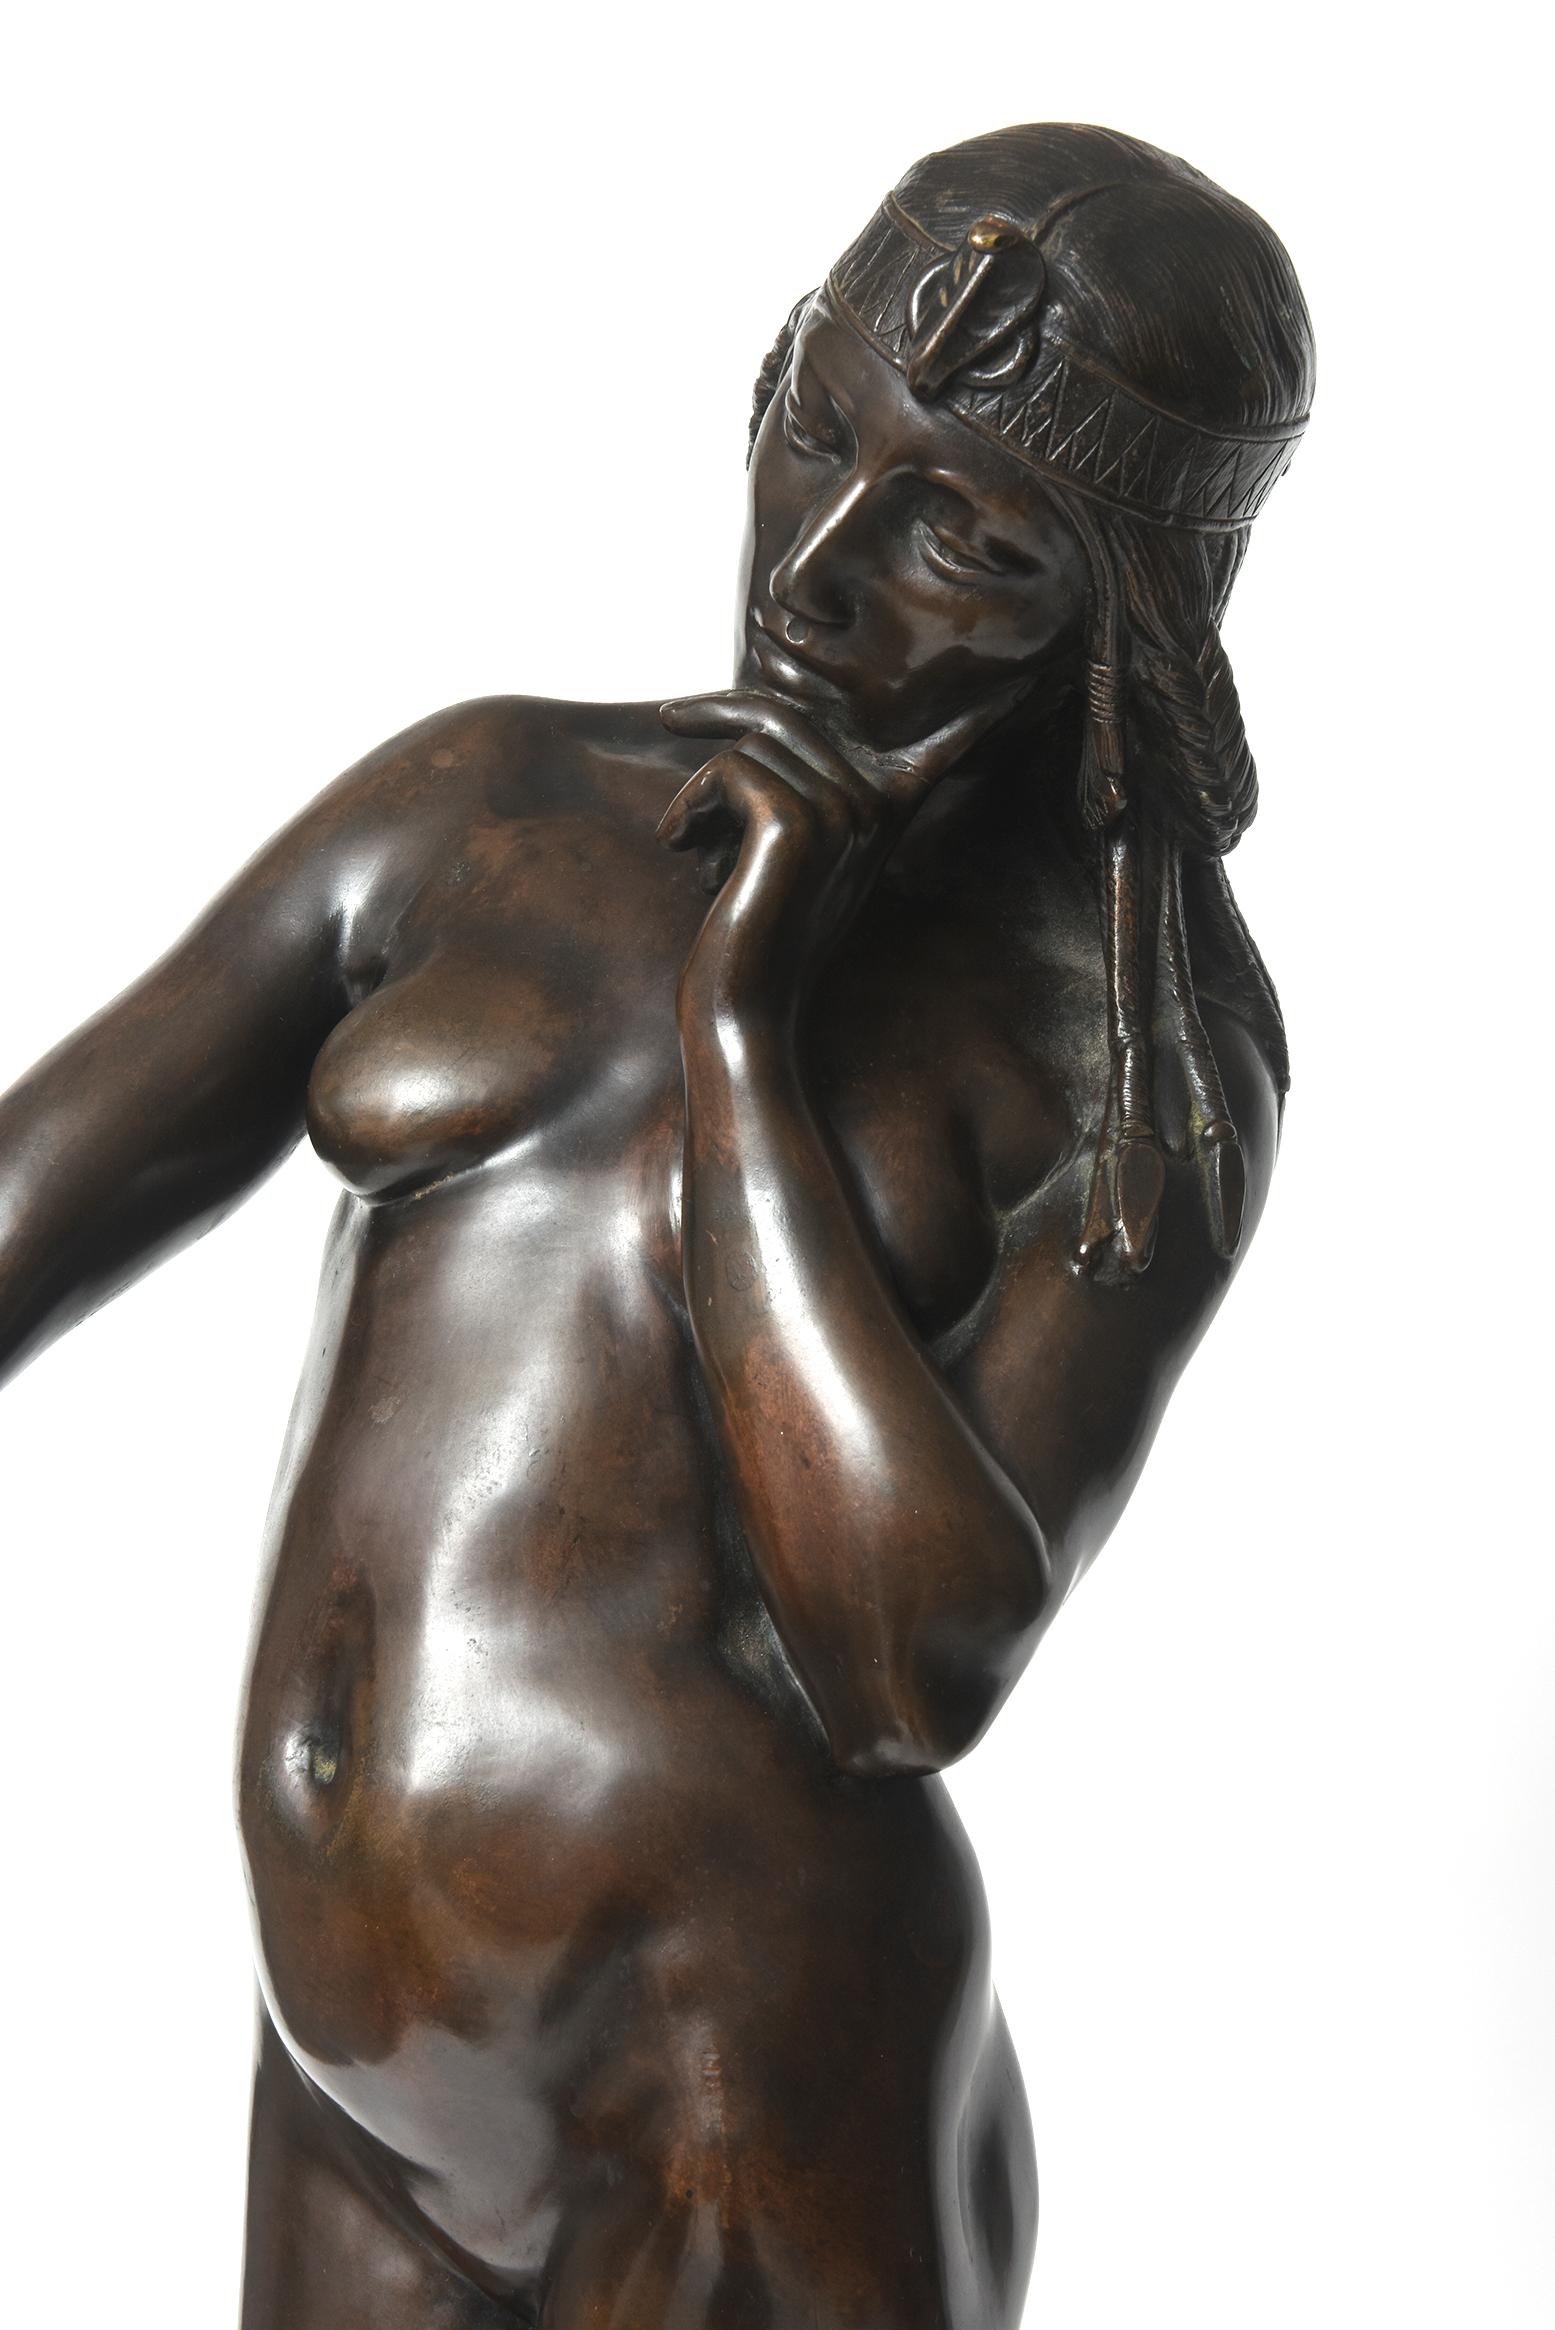 Striking bronze sculpture of a nude Cleopatra looking at herself in wonder in a mirror. She's wearing a cobra snake head band piece and her hair in braids. She is standing on a highly decorated stool. The front section of the stool is gilded and has